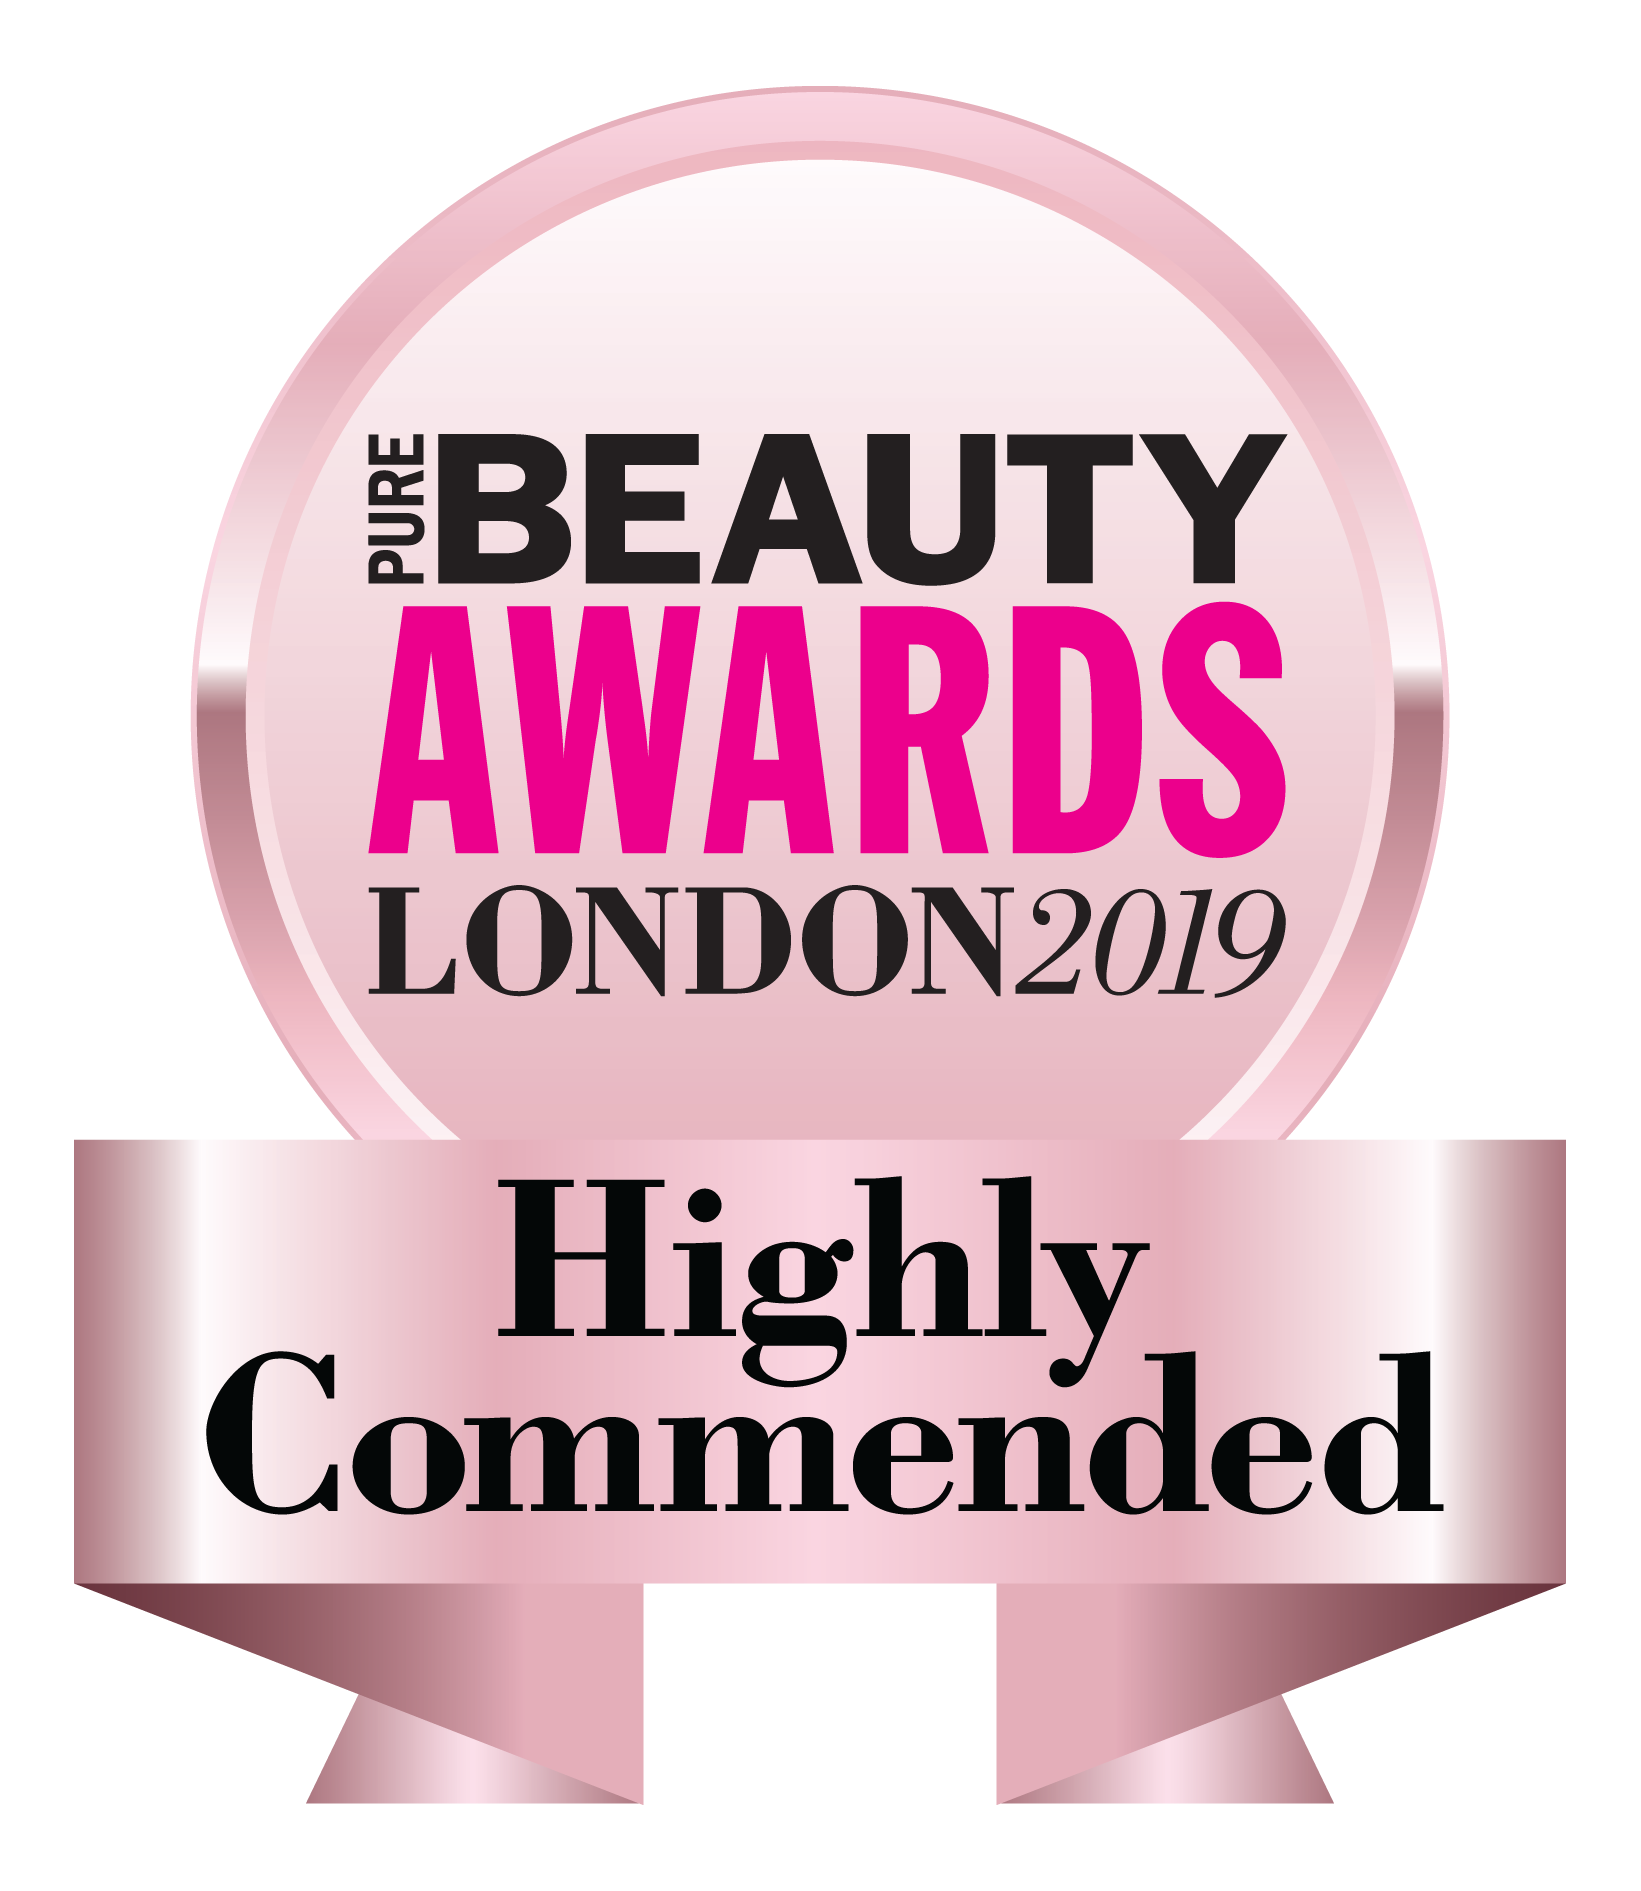 The highly commended badge for the Alteya Rose Fields at the Bribe Beauty Awards London 2019.